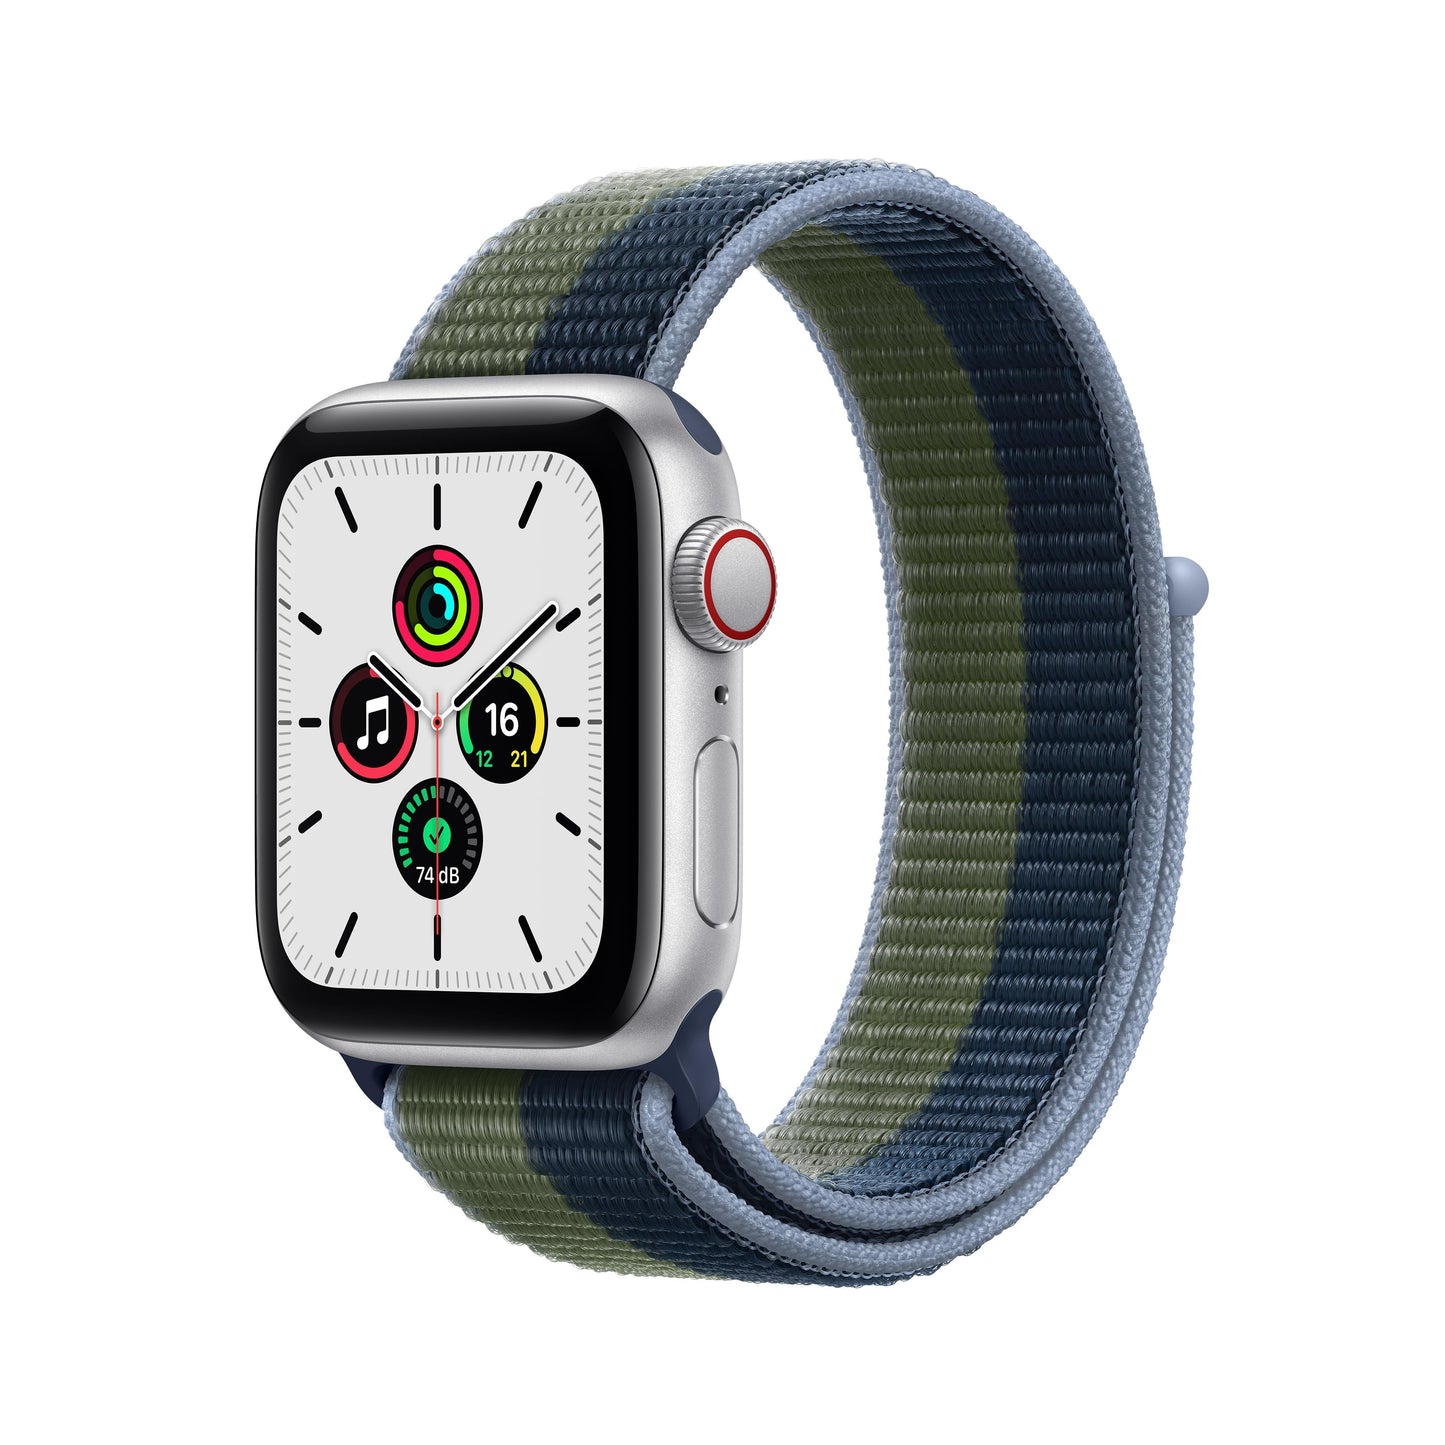 Apple Watch SE GPS + Cellular, 40mm Silver Aluminium Case with Abyss Blue/Moss Green Sport Loop